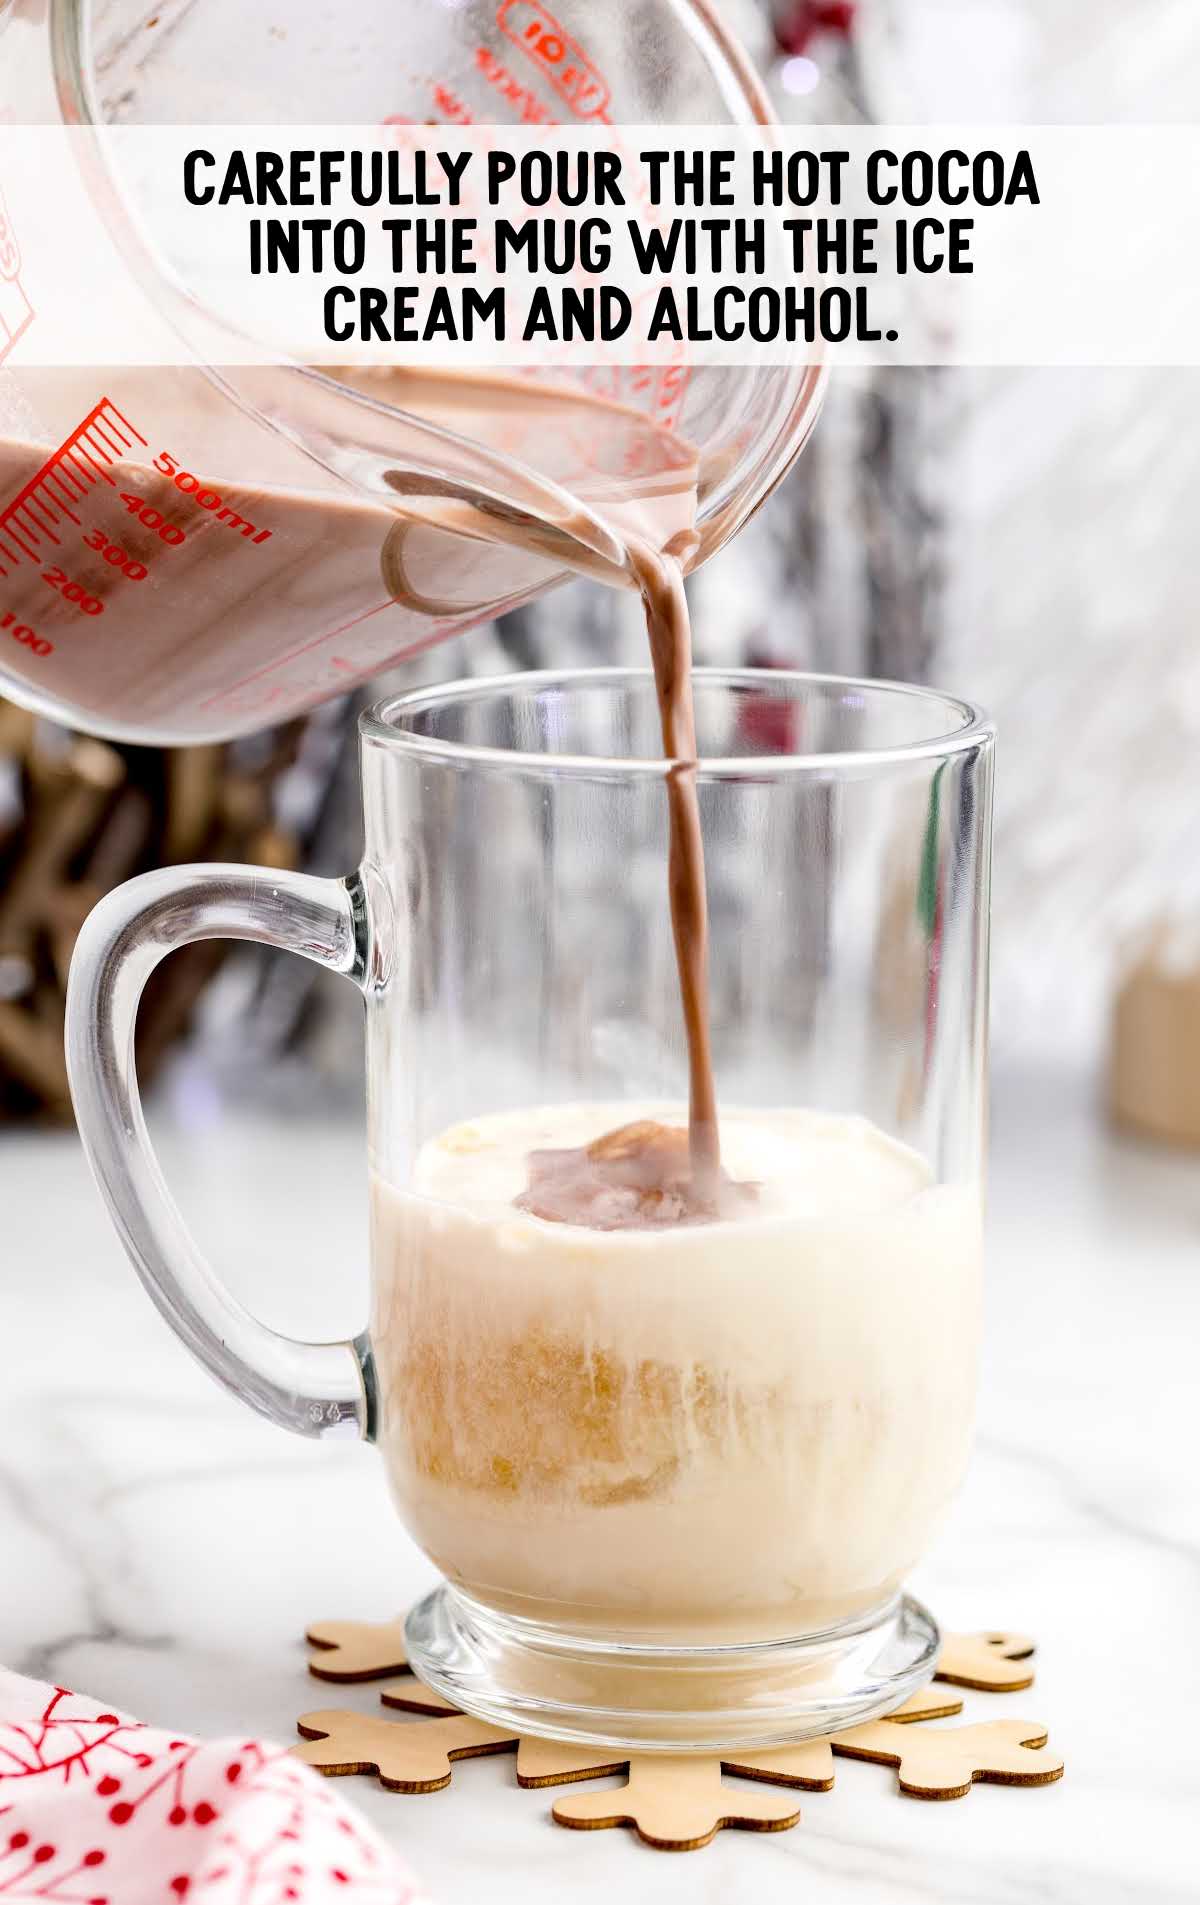 hot cocoa poured into a mug with the ice cream and alcohol